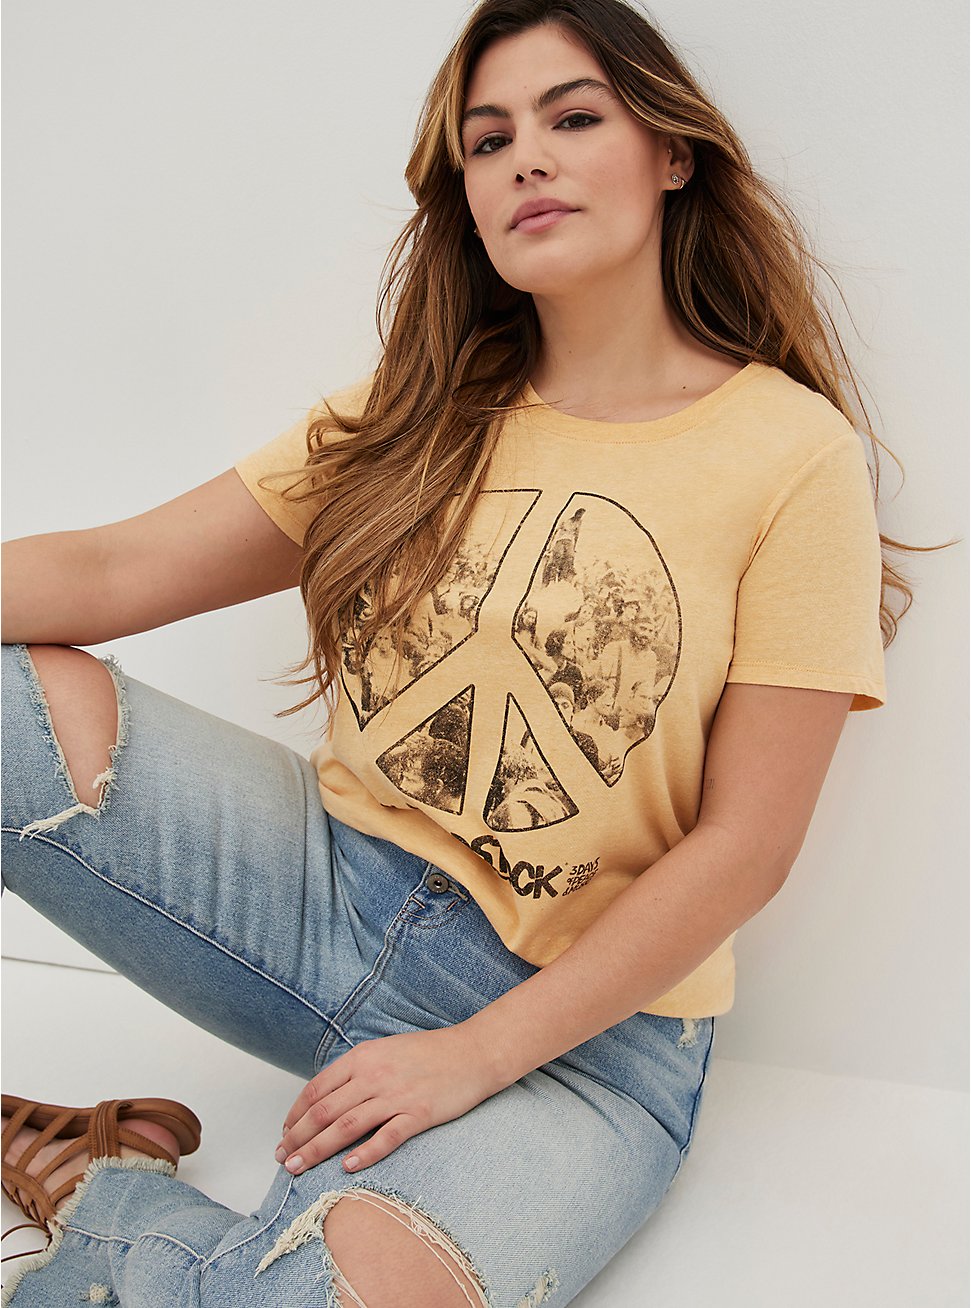 Plus Size Classic Fit Crew Tee - Cotton Woodstock Gold, GOLD, hi-res